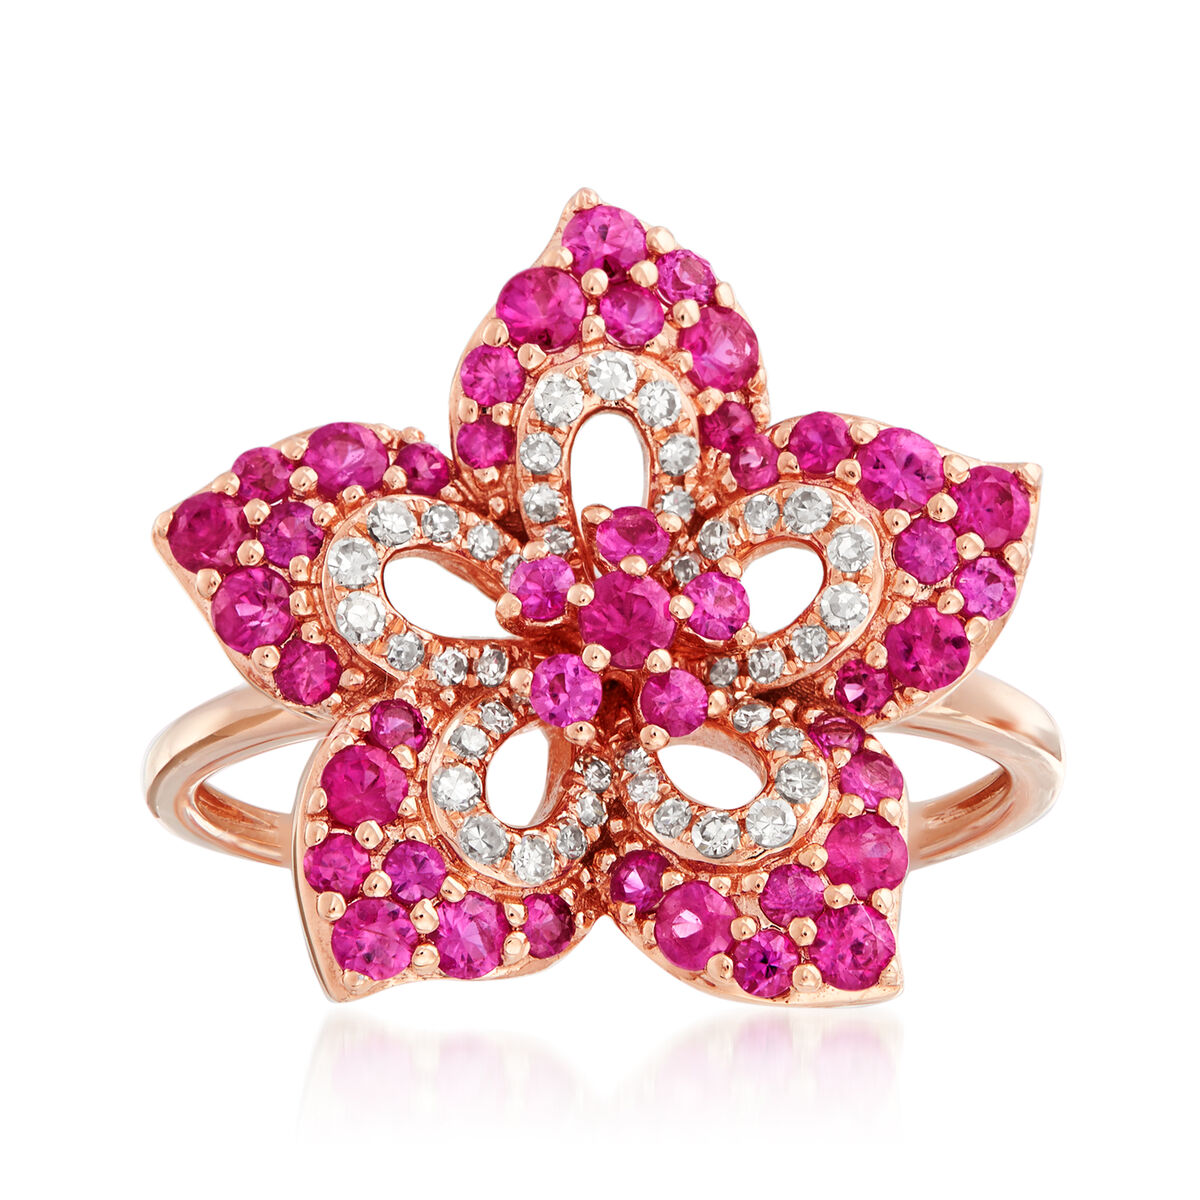 1.00 ct. t.w. Pink Sapphire and .20 ct. t.w. Diamond Flower Ring in ...